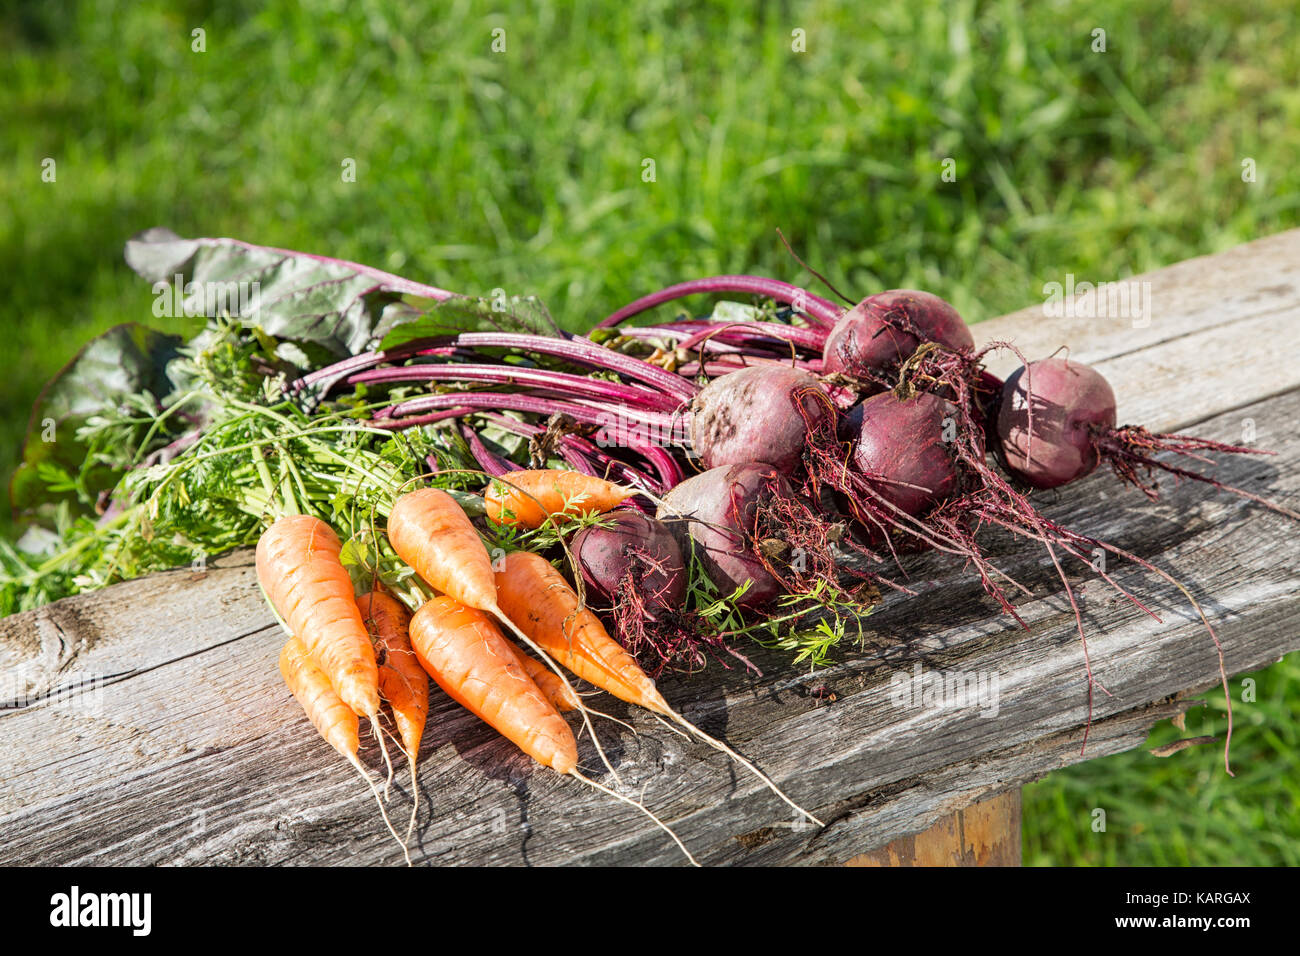 Beets and carrots from the beds on old boards Stock Photo